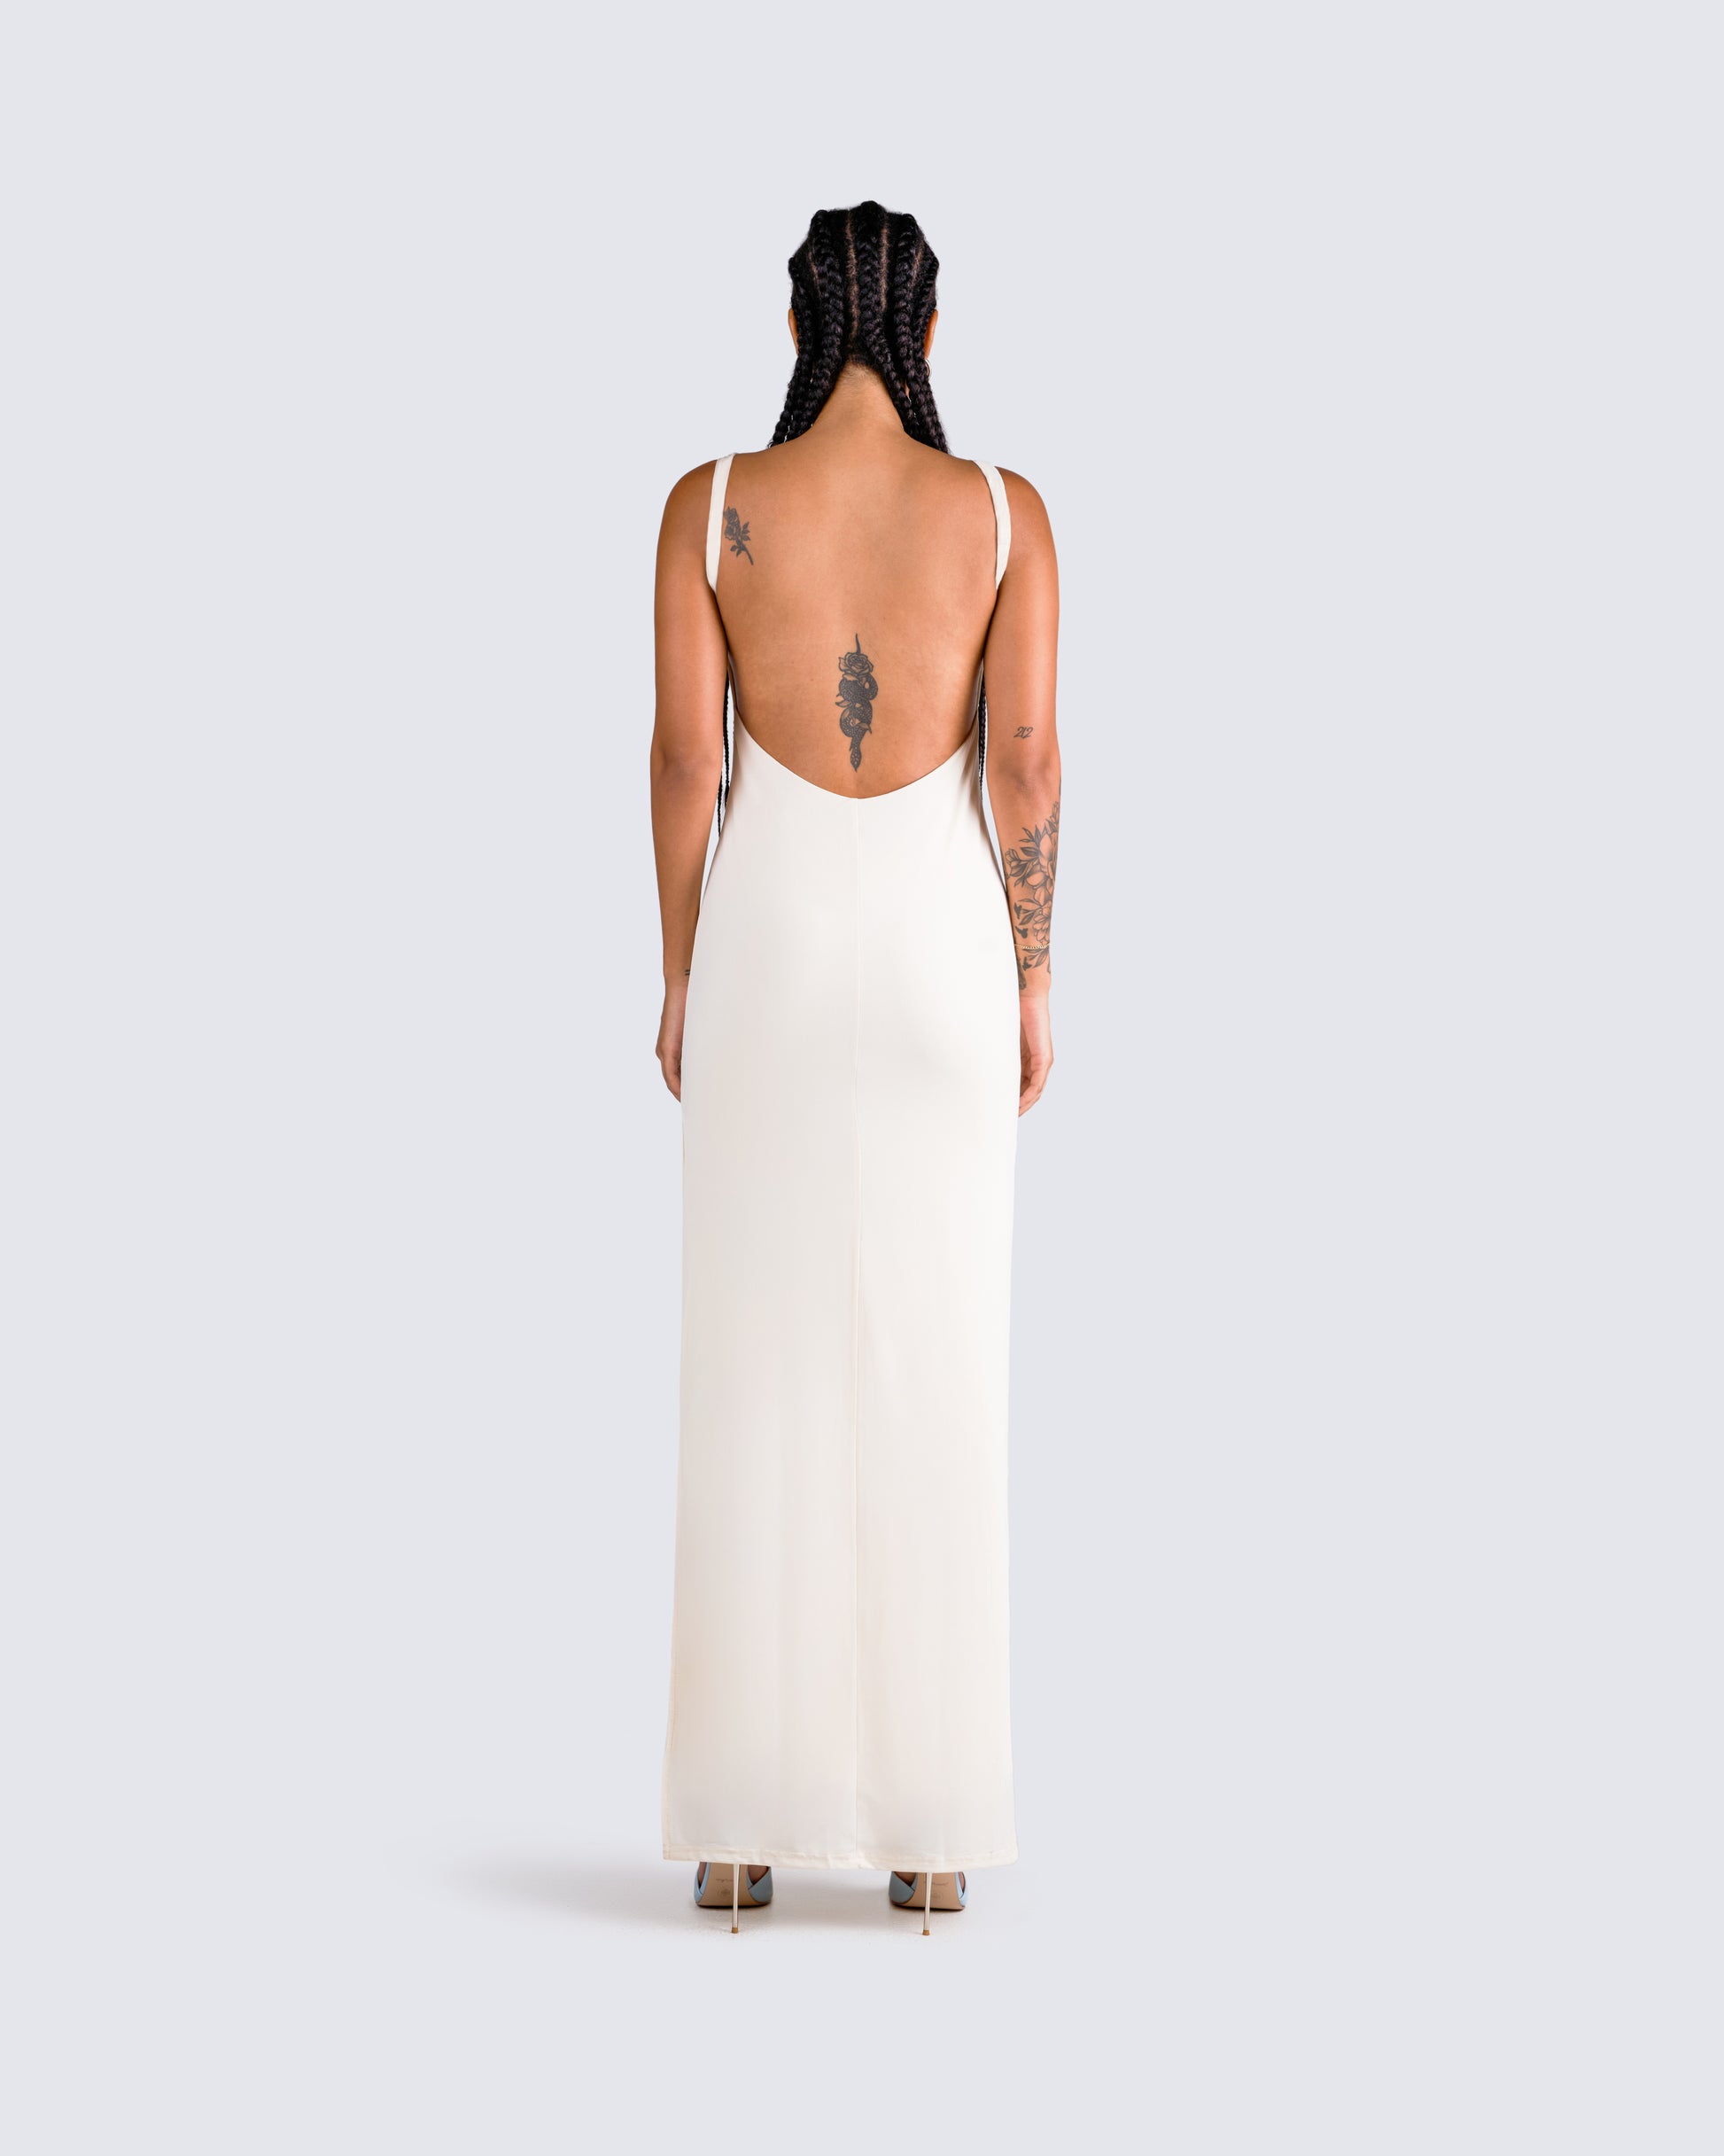 Backless Body in Ivory